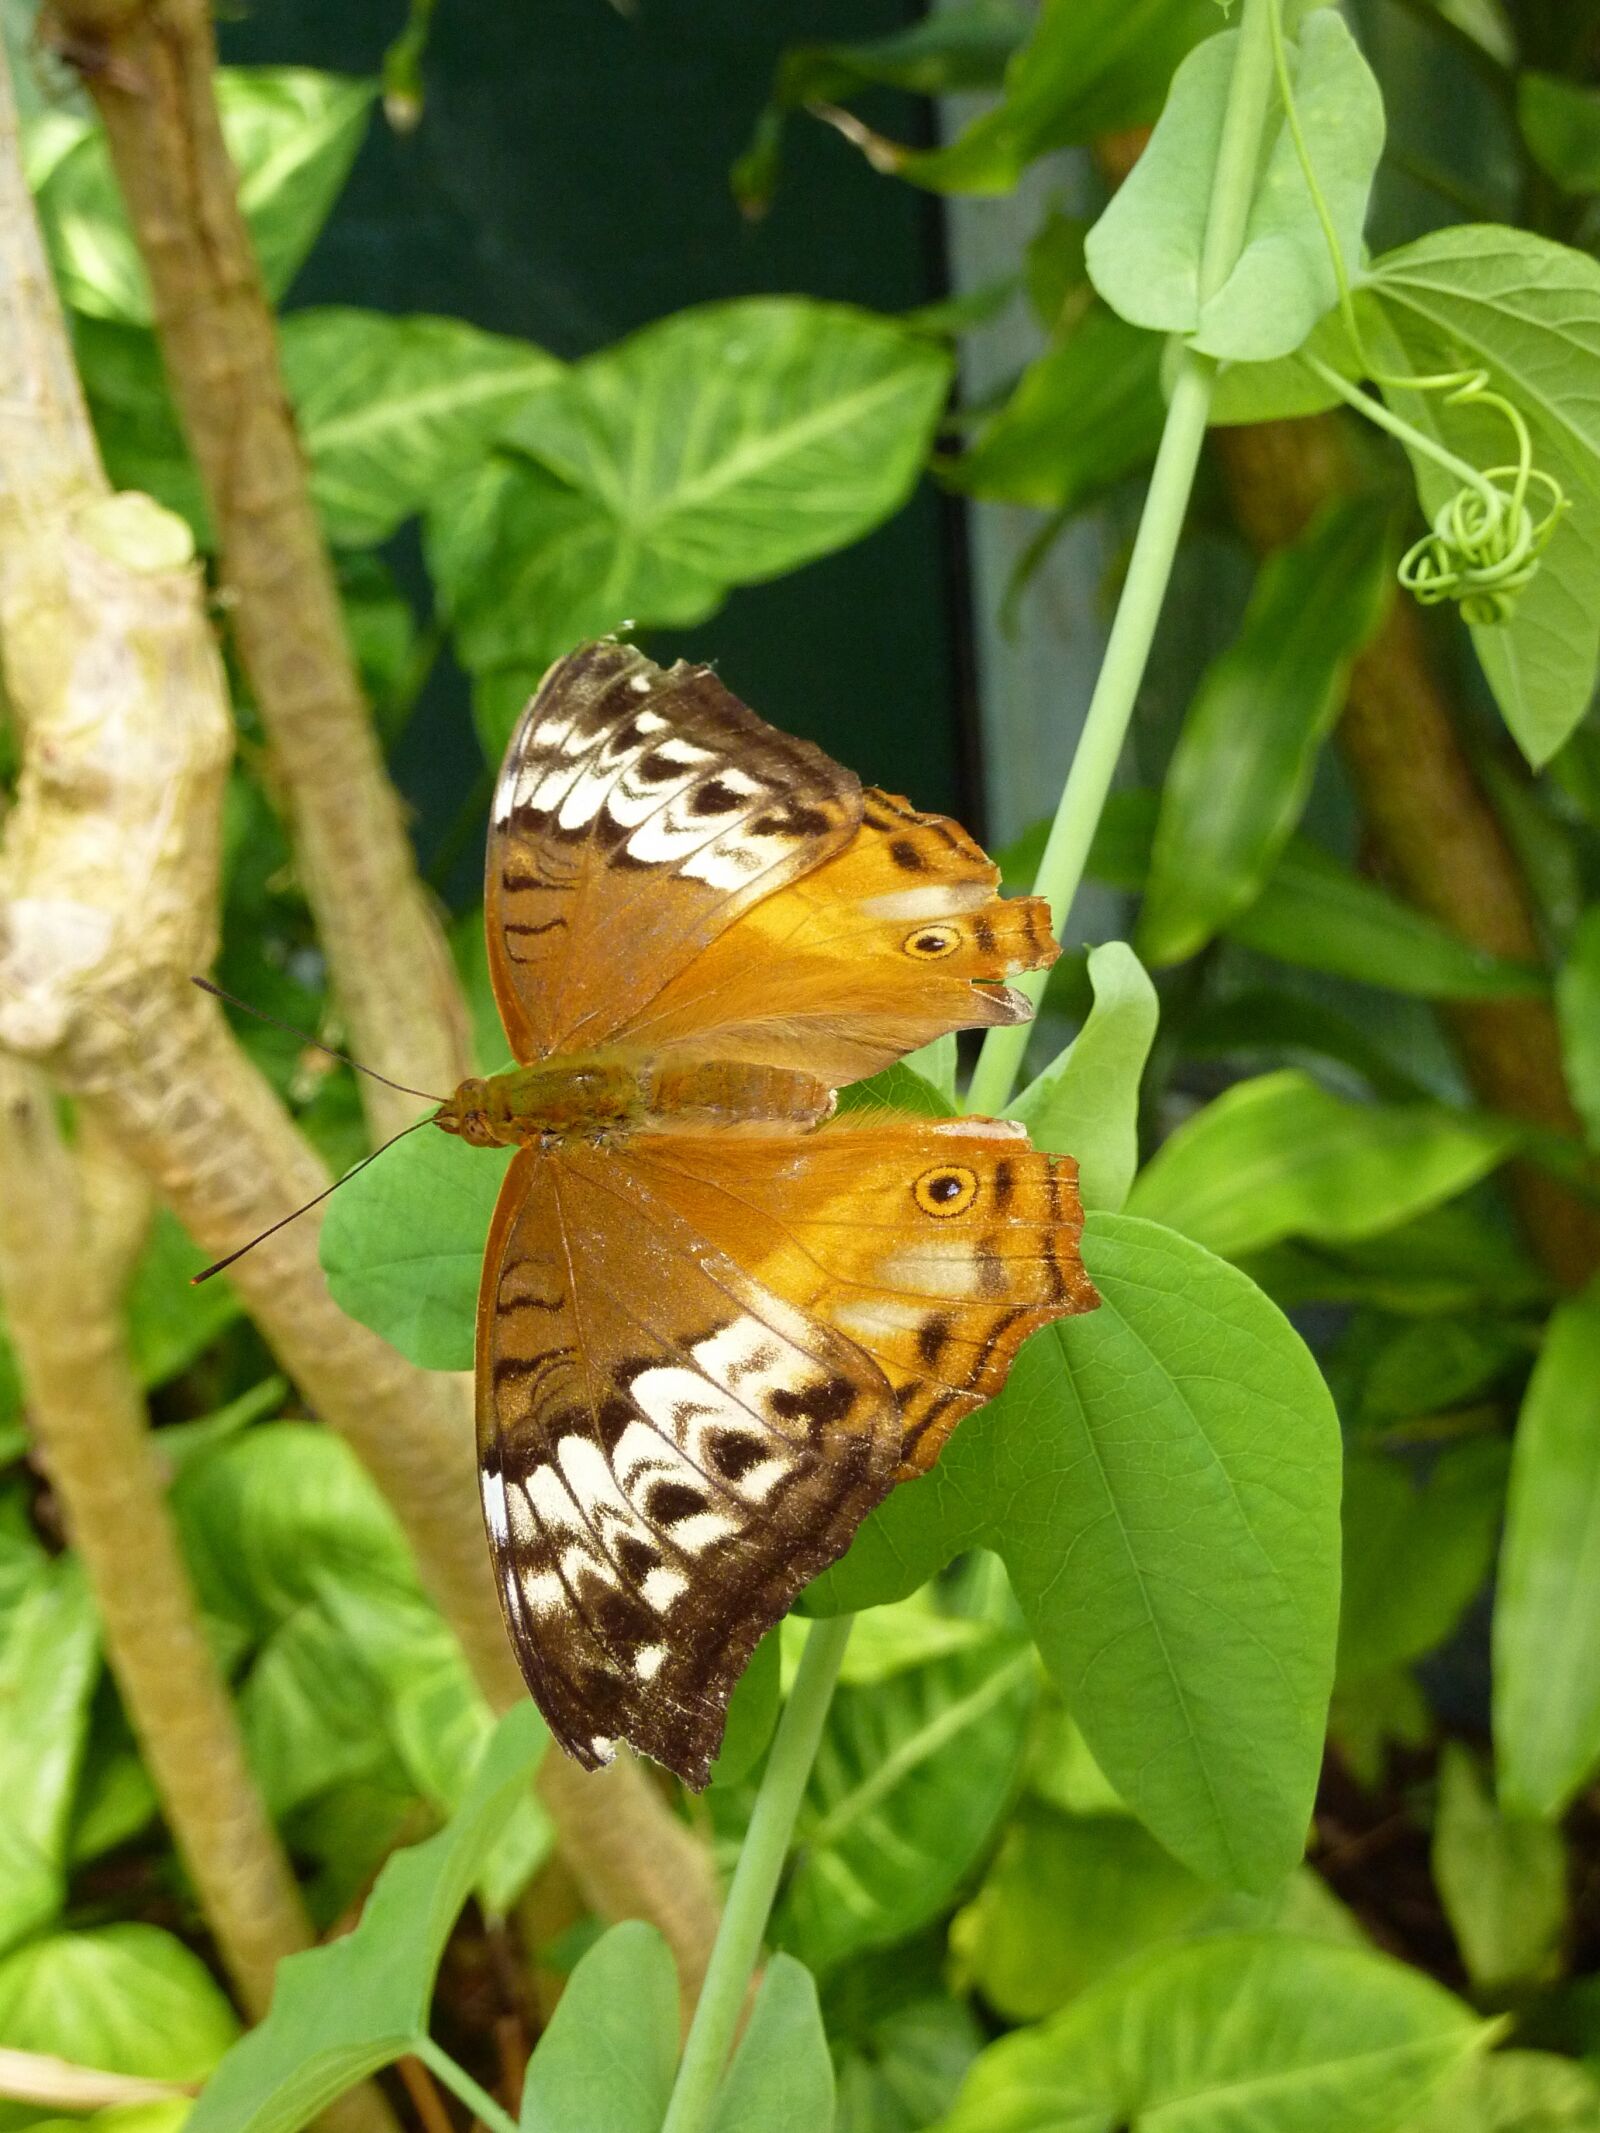 Panasonic DMC-TZ7 sample photo. Butterfly, insects, nature photography